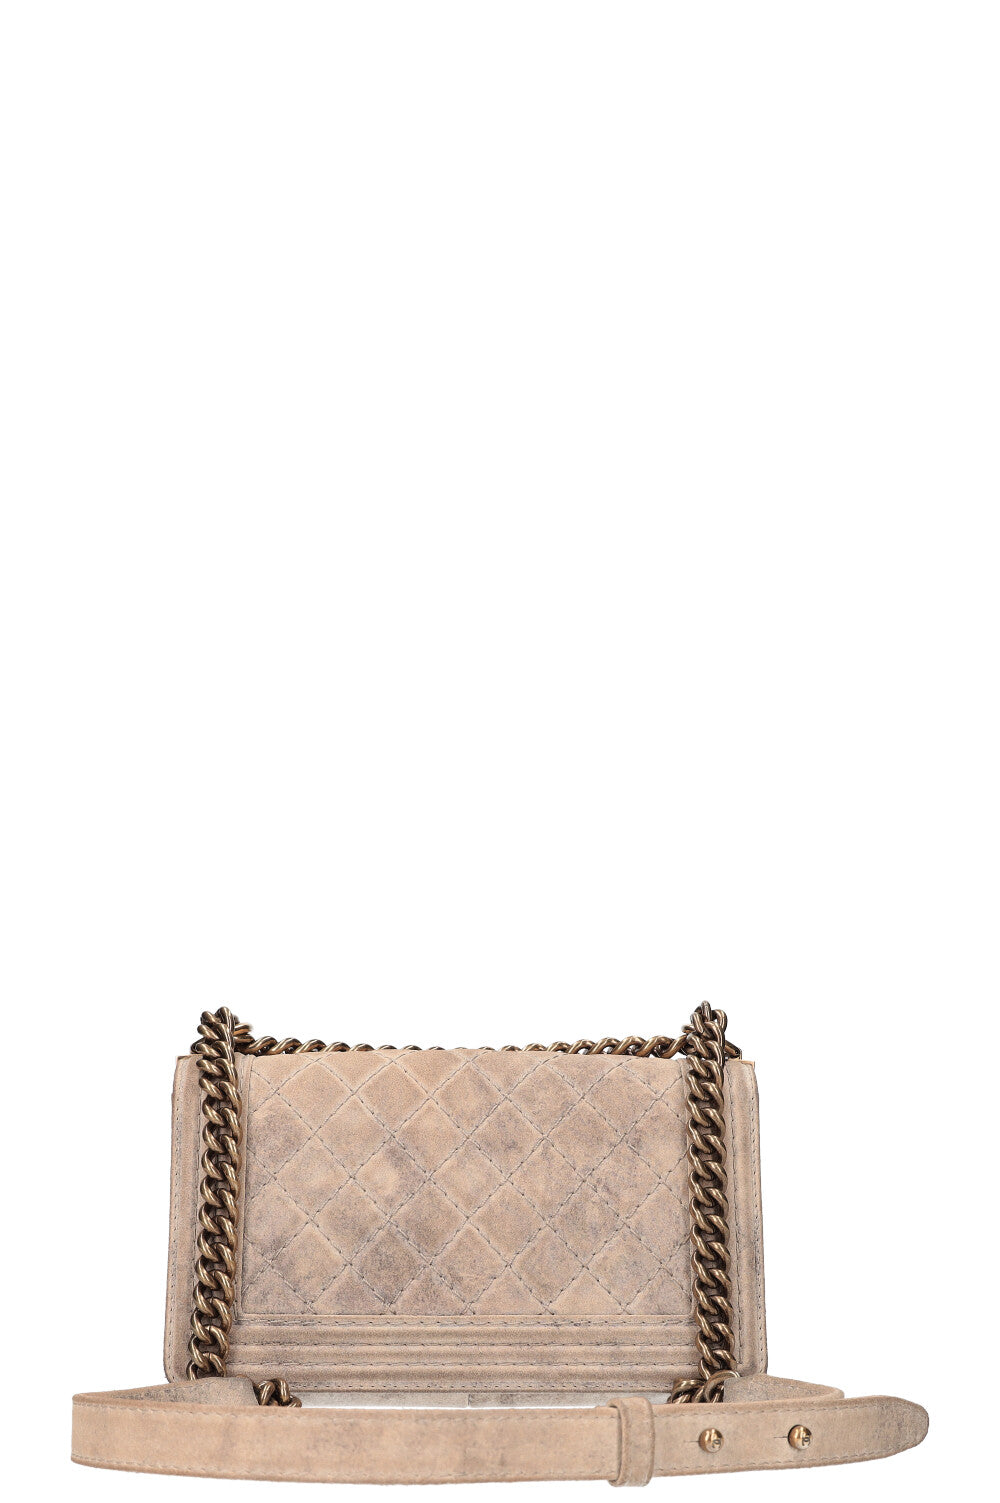 CHANEL Boy Bag Small Distressed Suede Beige